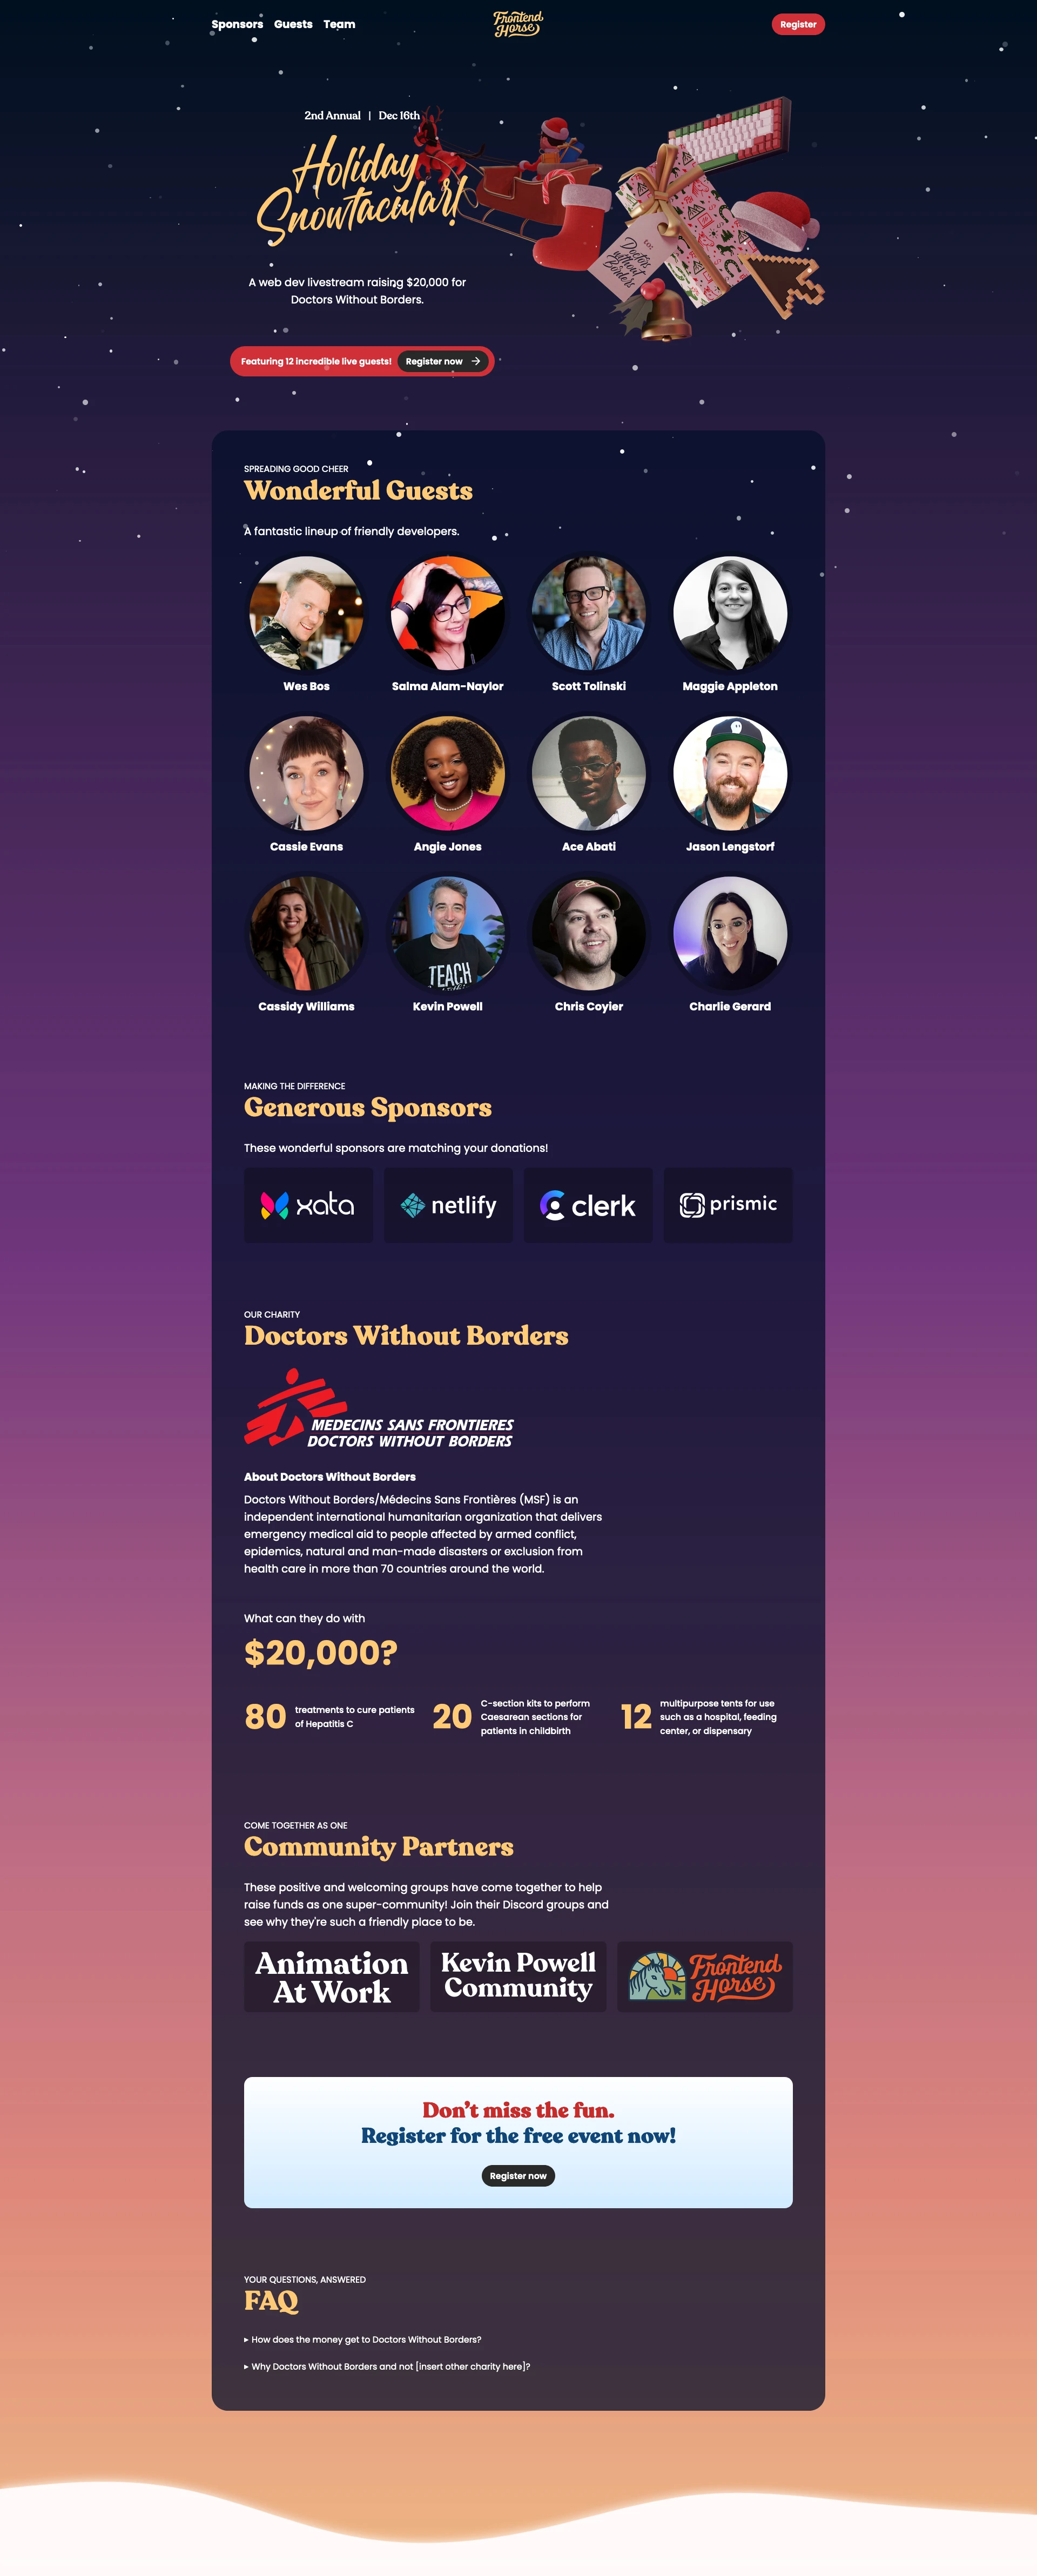 Holiday Snowtacular Landing Page Example: A web dev livestream raising $20,000 for Doctors Without Borders.